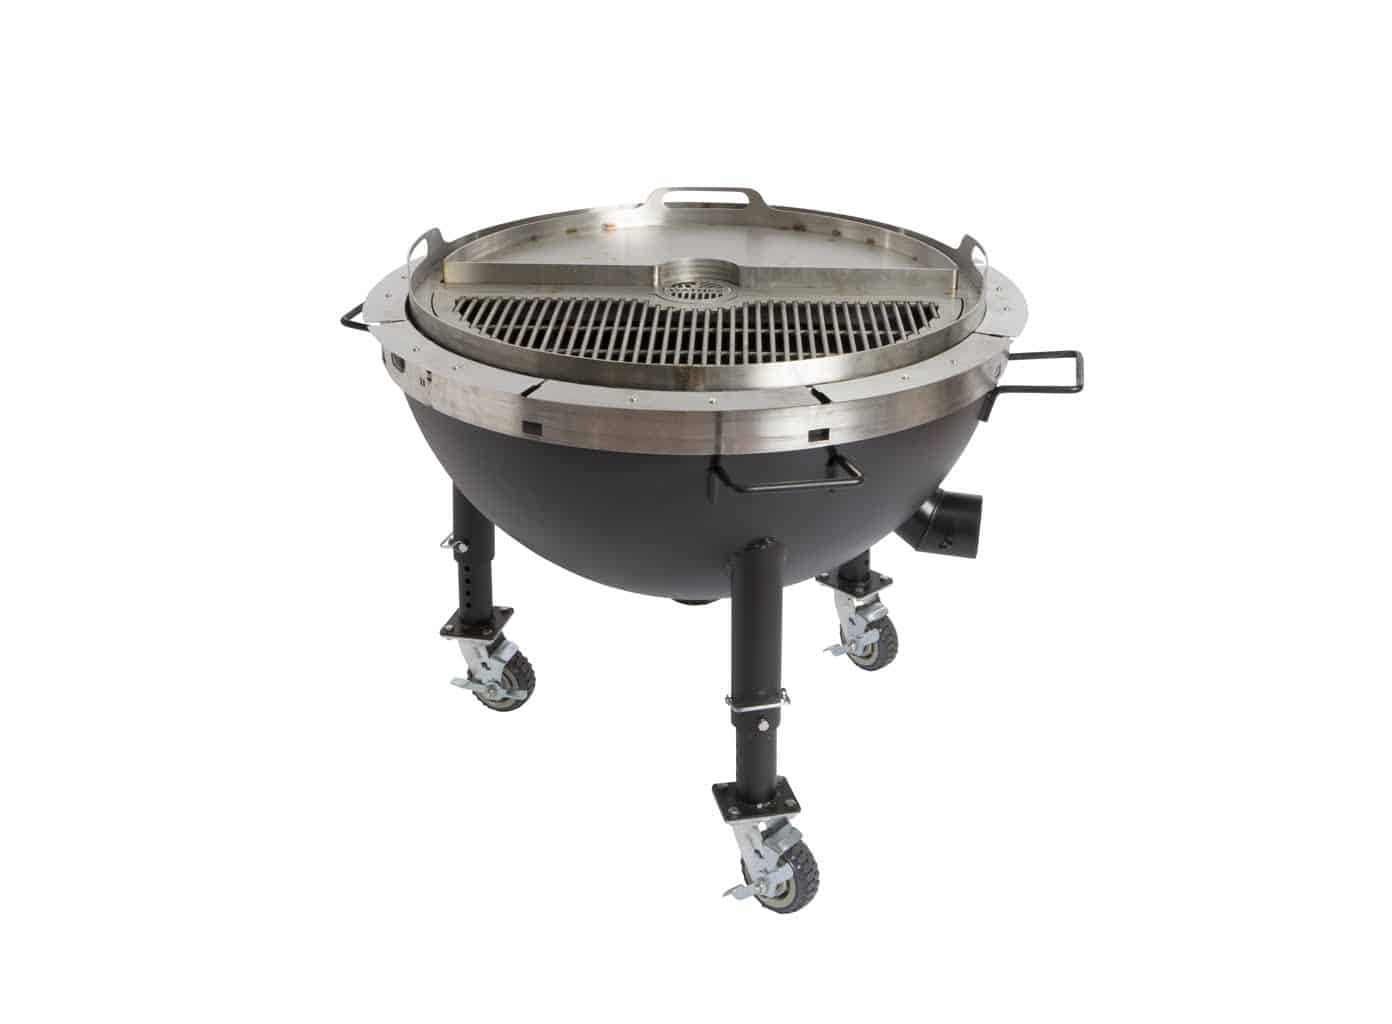 35-inch Pioneer Multi-Function Grill and Firepit